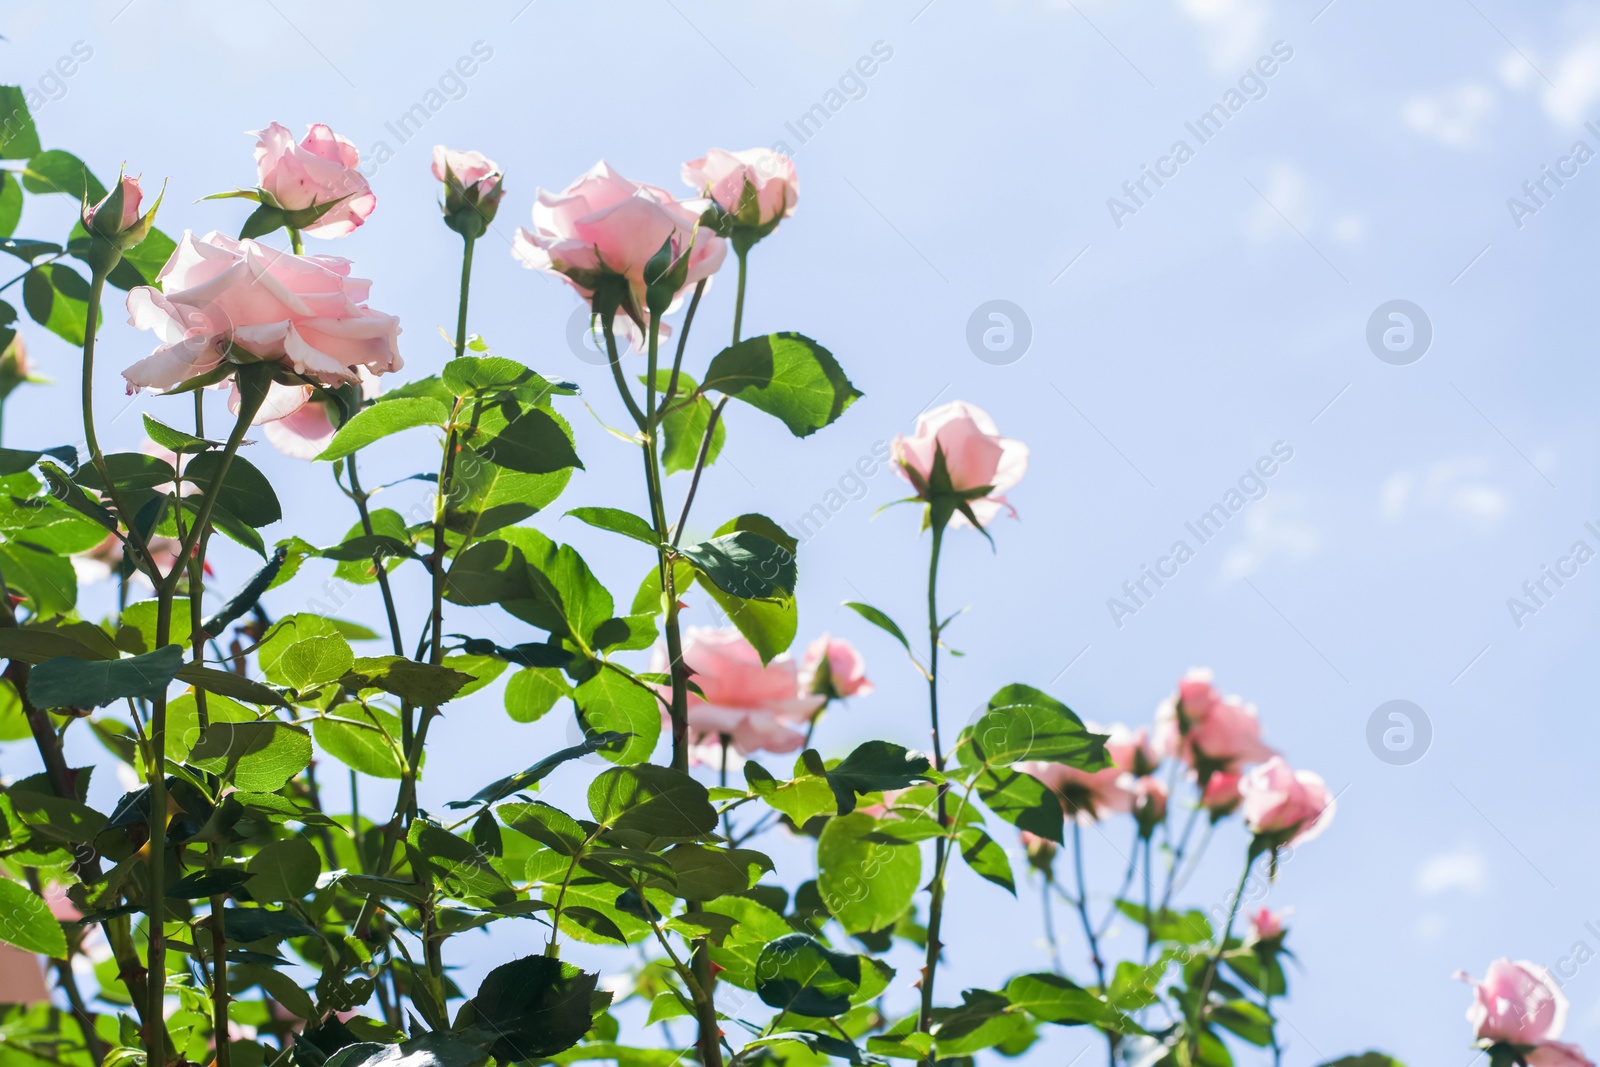 Photo of Bush with beautiful blooming roses against blue sky, space for text